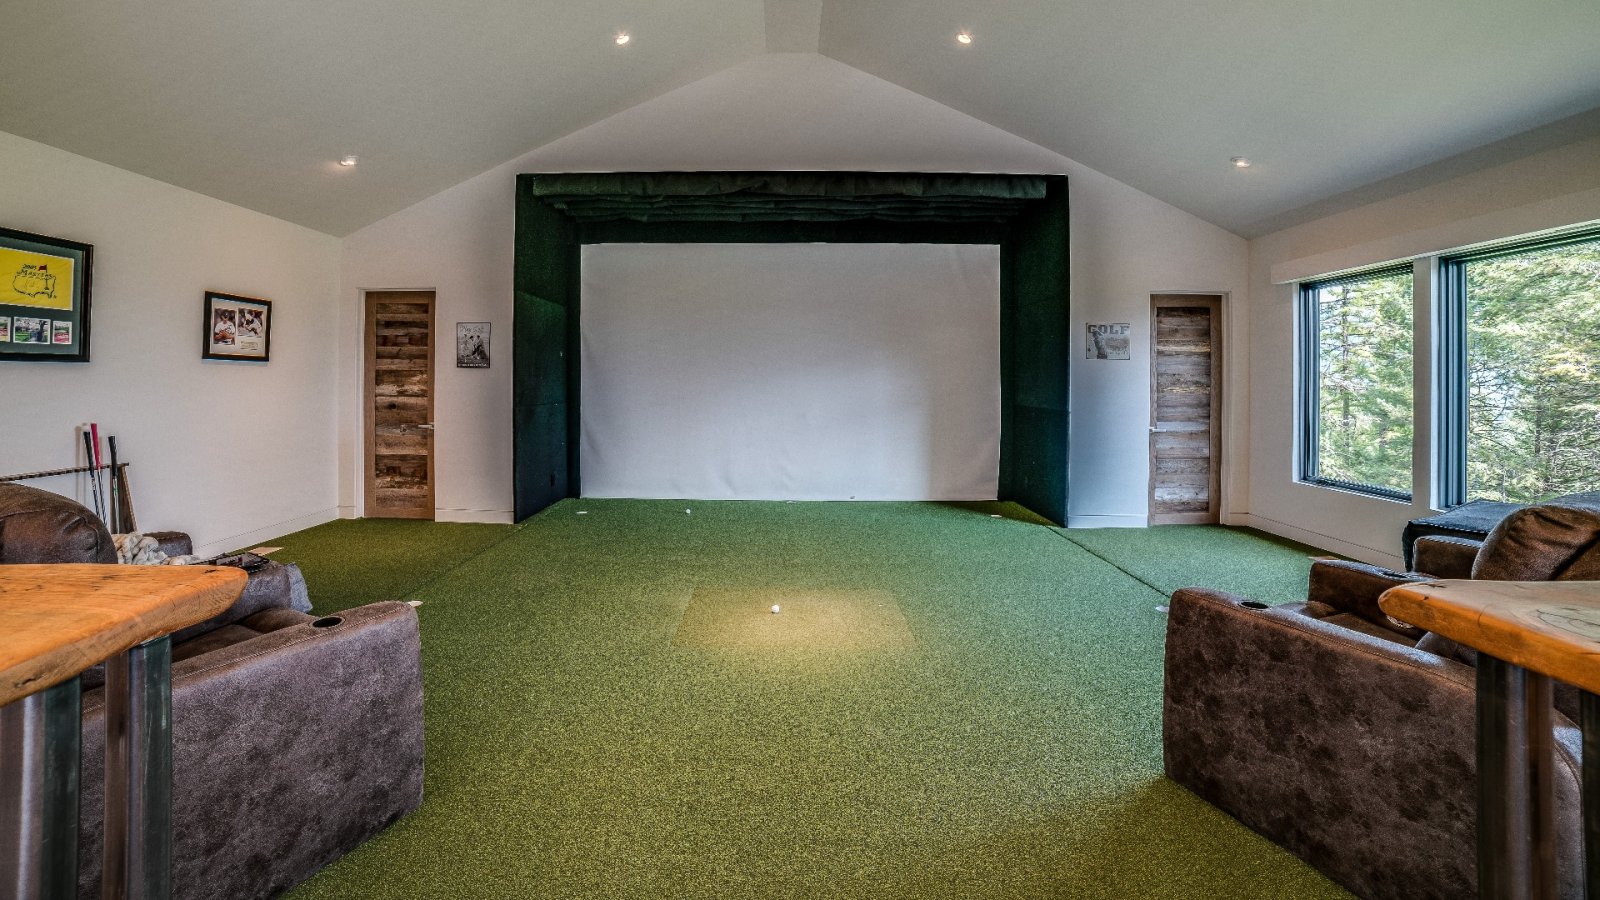 How to have your professional sports amenity at home: 5 ideas